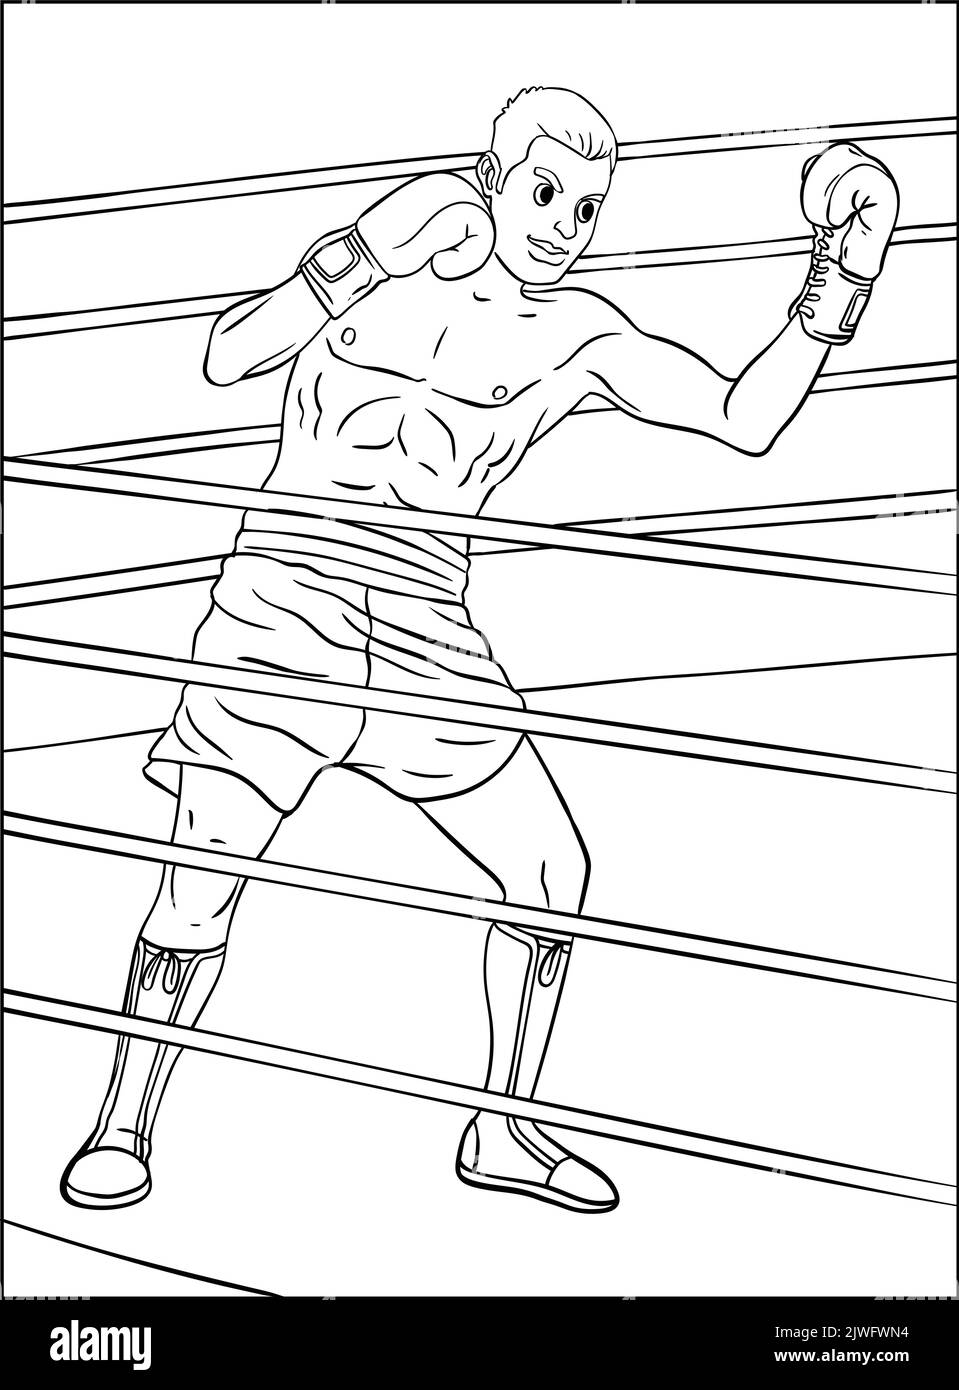 Boxing Coloring Page for Kids Stock Vector